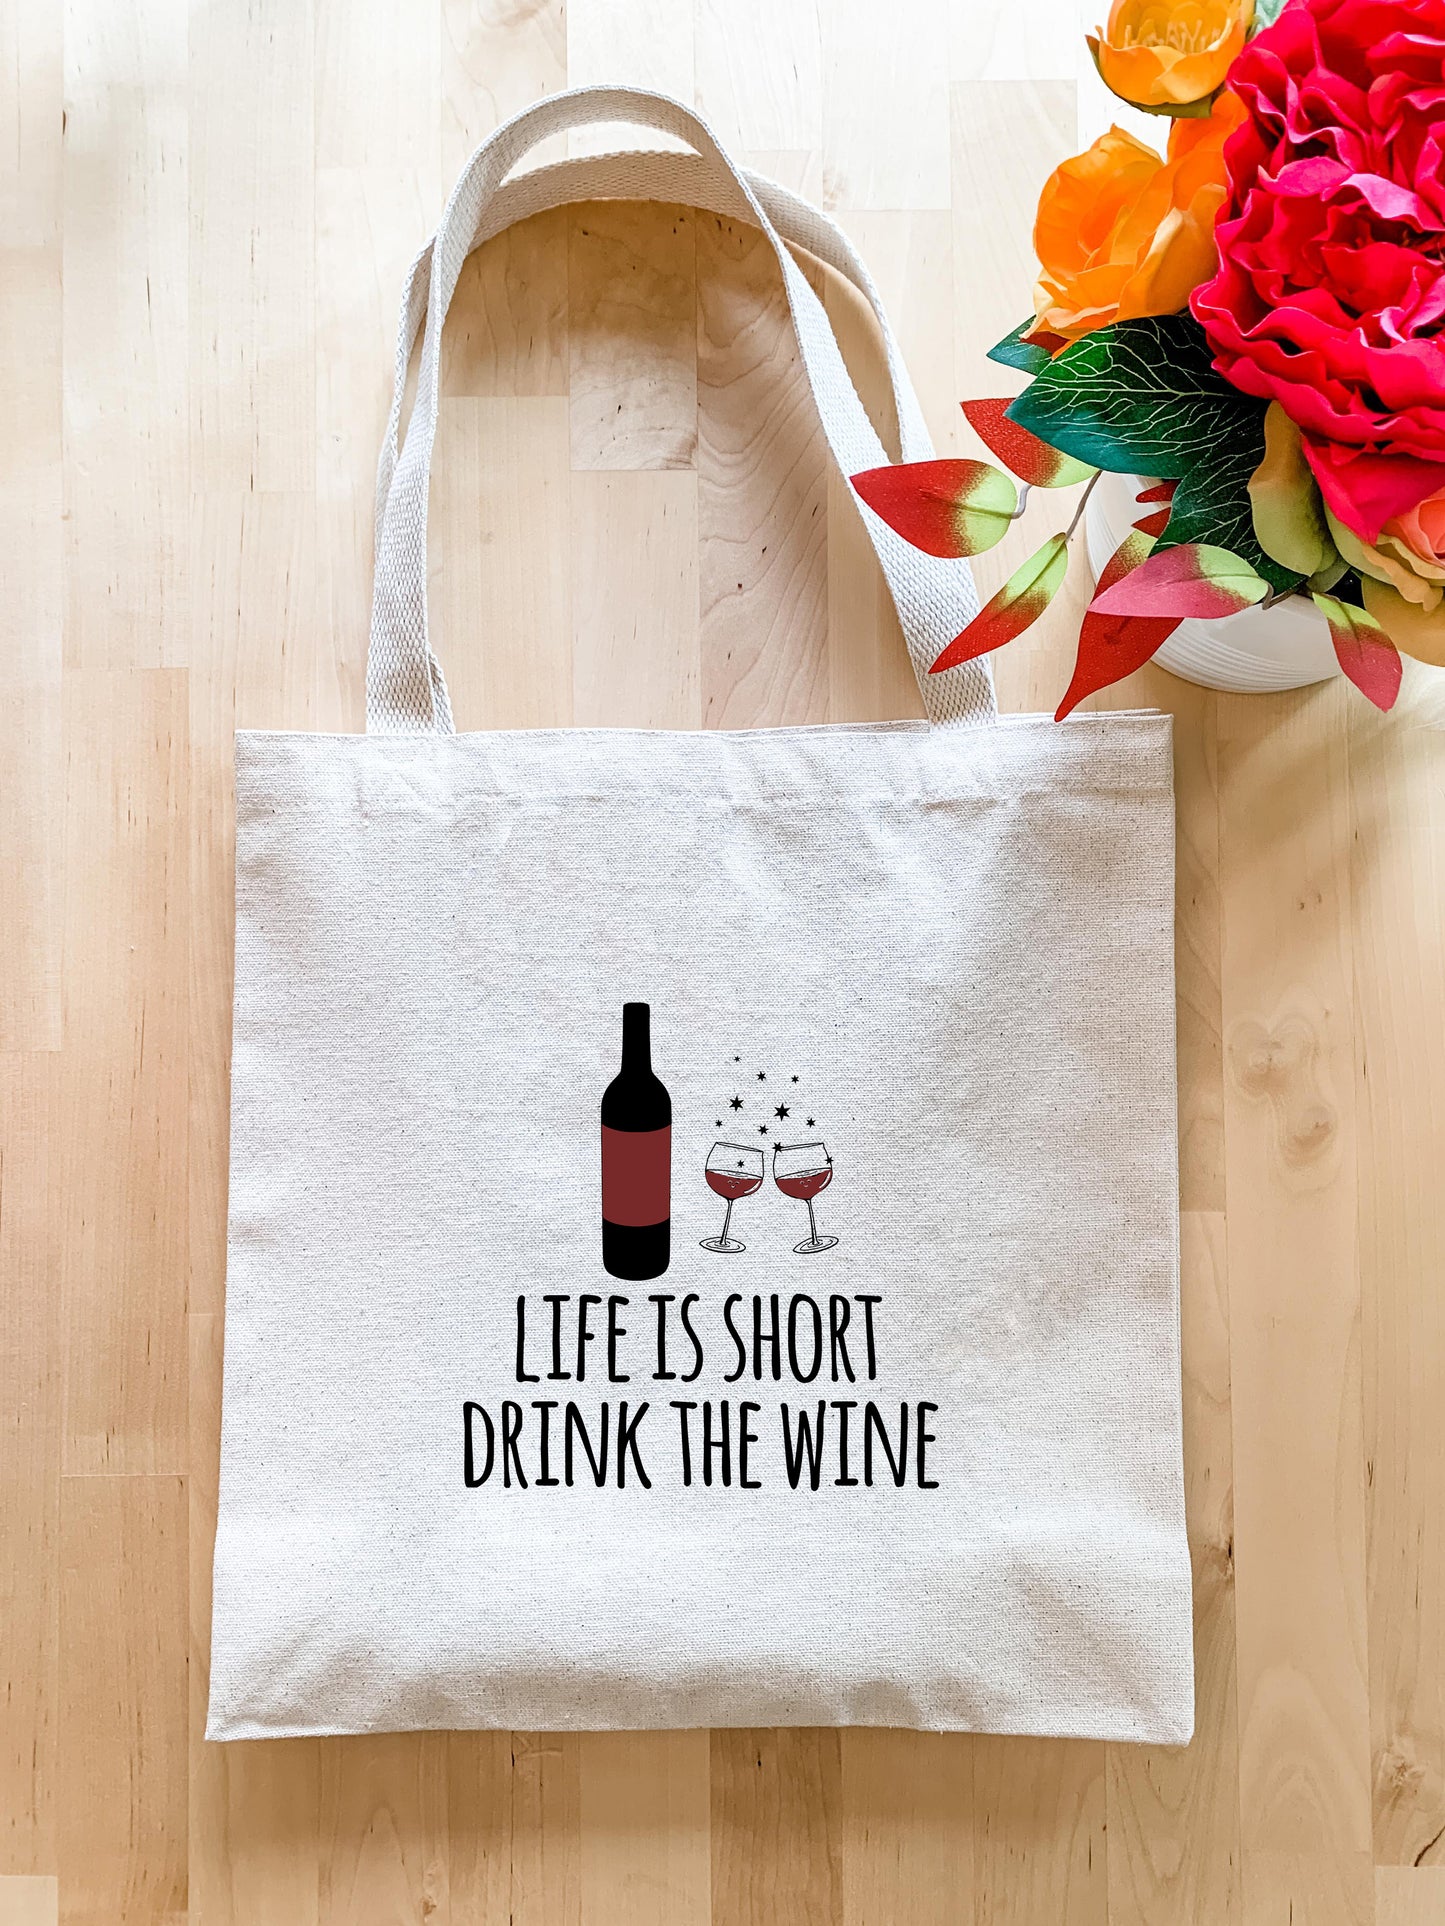 a tote bag with a bottle of wine and a vase of flowers